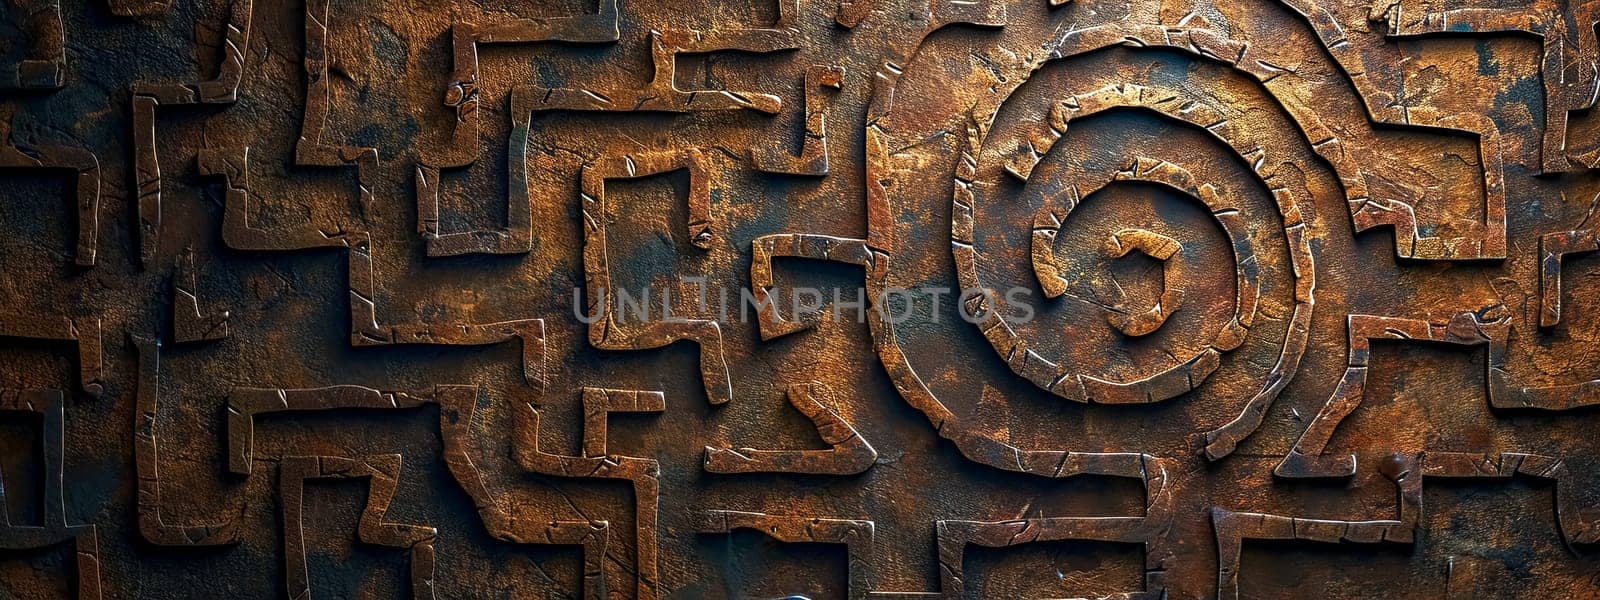 intricate metallic maze design, evoking a sense of complexity and ancient craftsmanship against a dark, textured background. by Edophoto